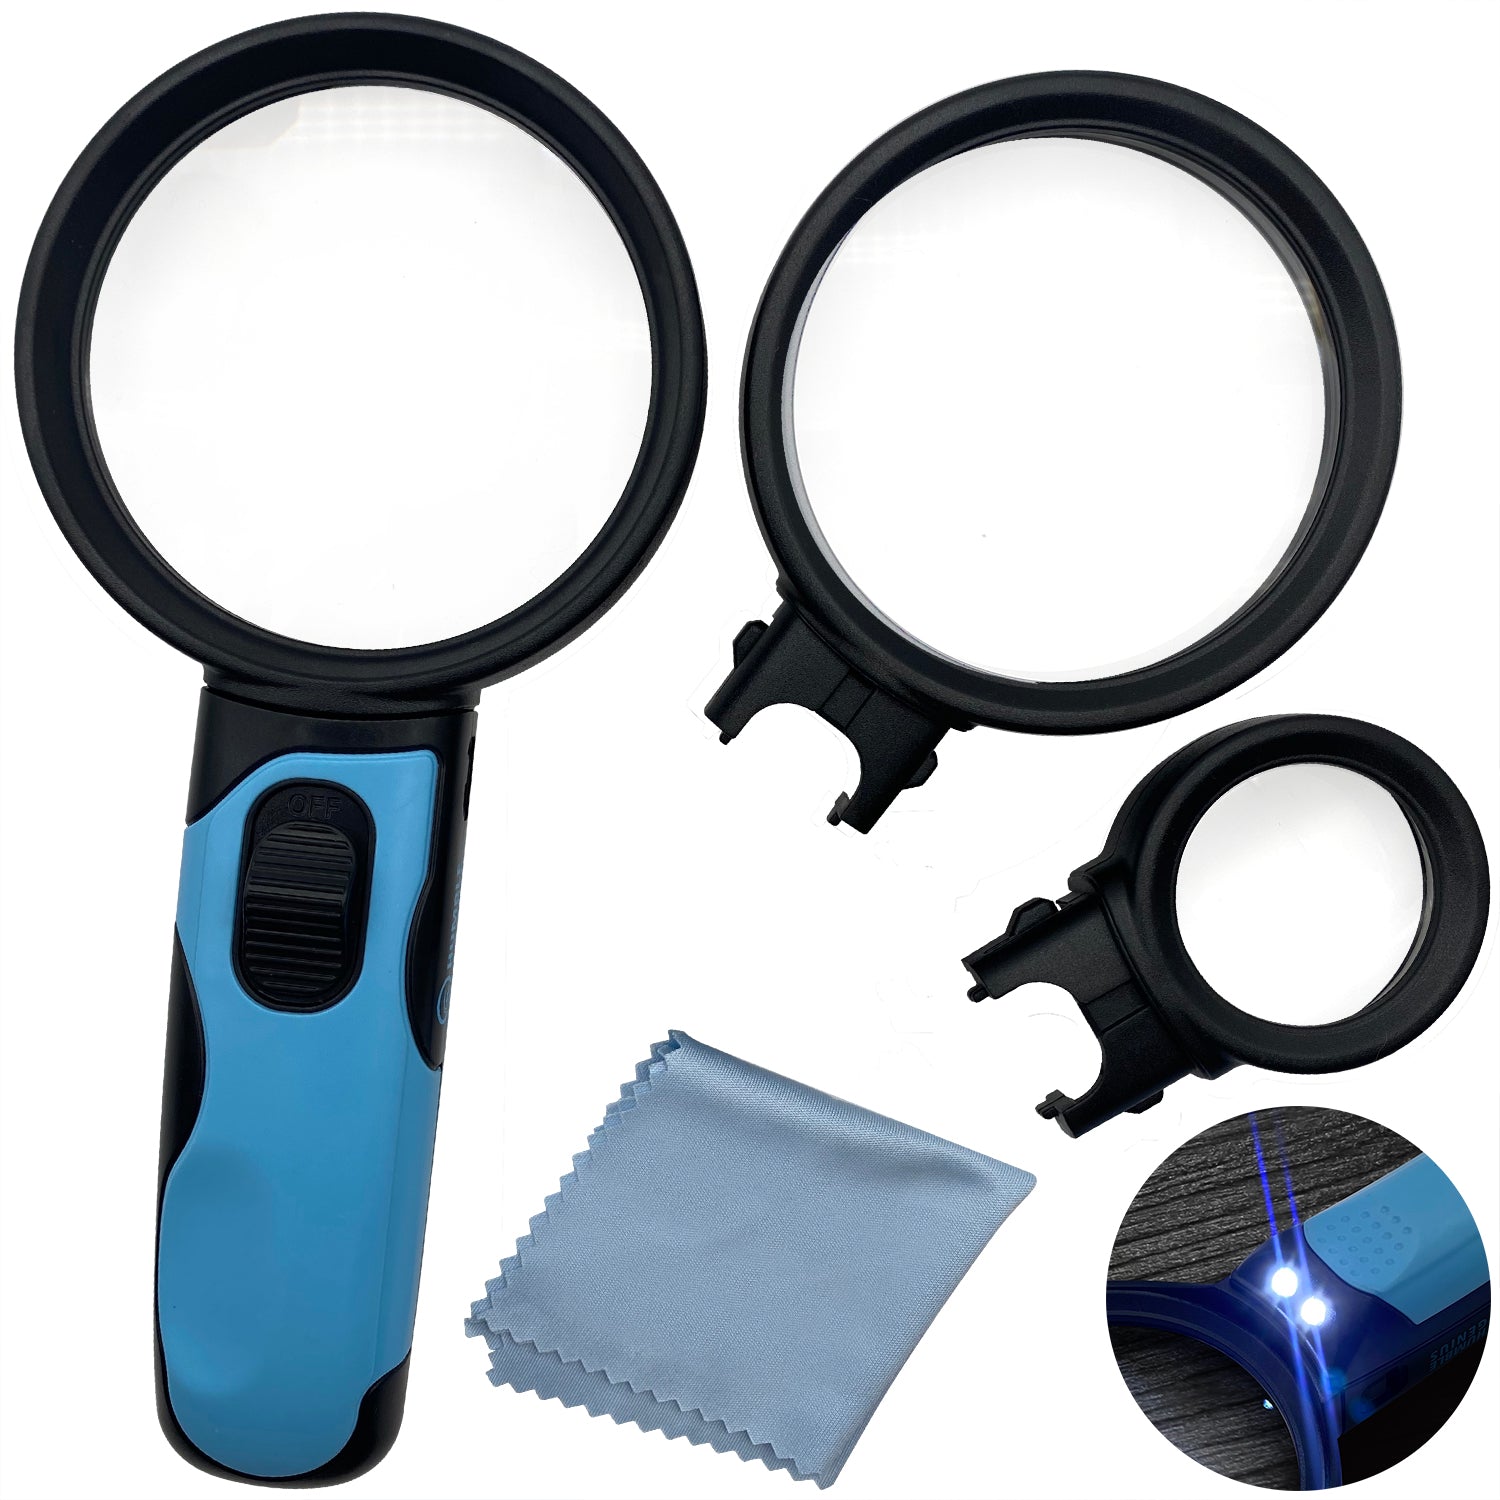 Hand Held Magnifier 10x/30x with LED Light